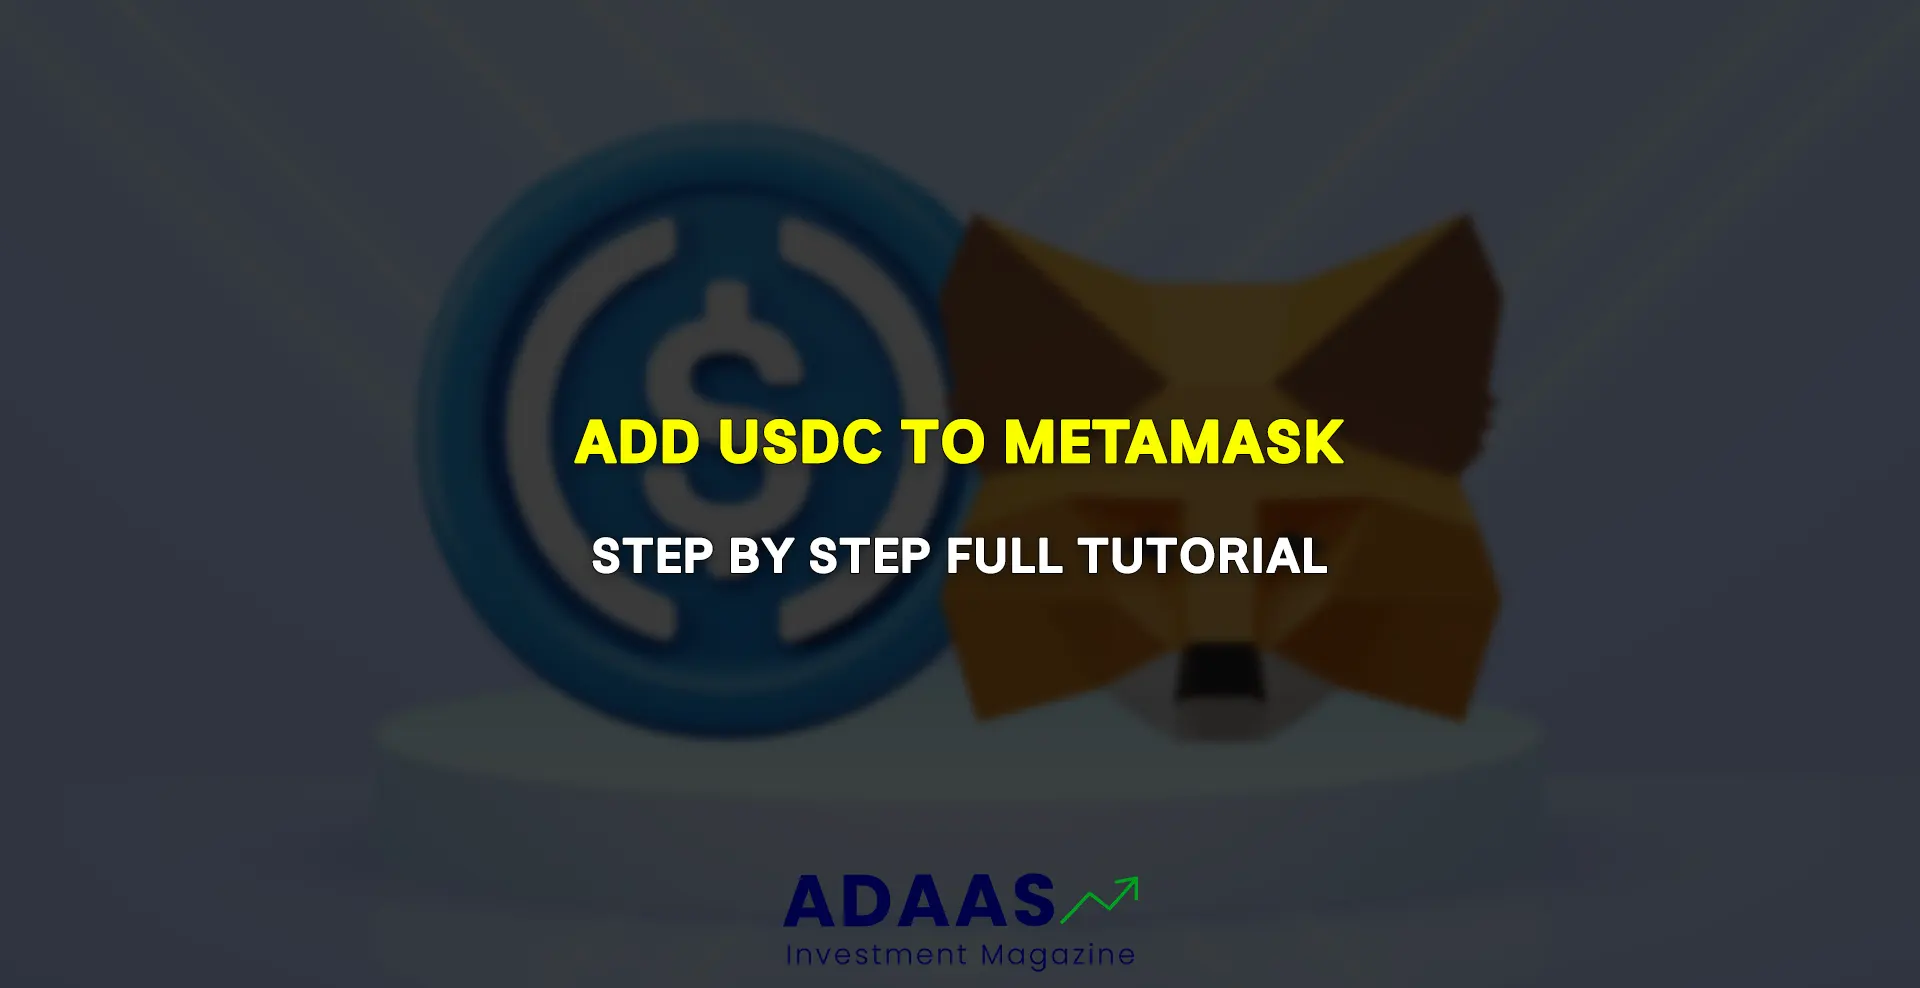 Step-by-step guide on adding funds to Metamask